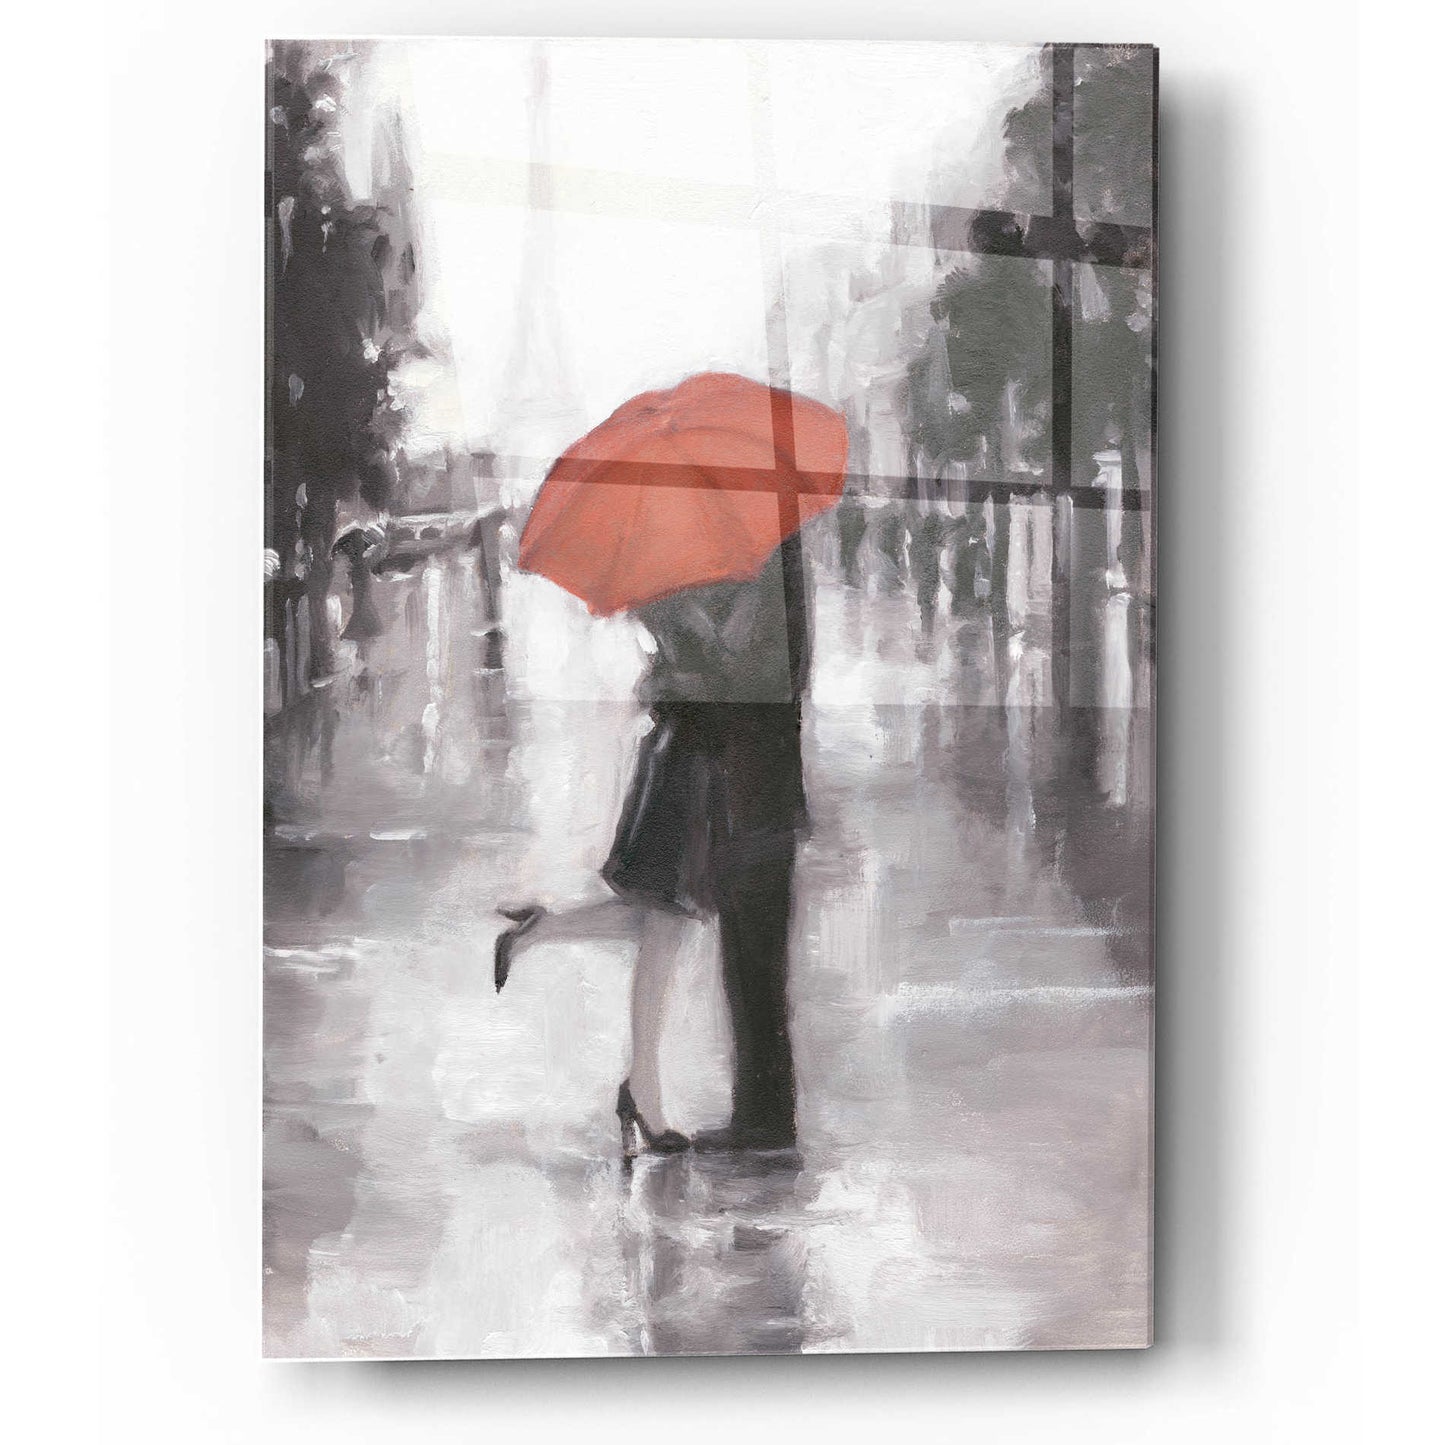 Epic Art 'Caught in the Rain' by Ethan Harper, Acrylic Glass Wall Art,12x16